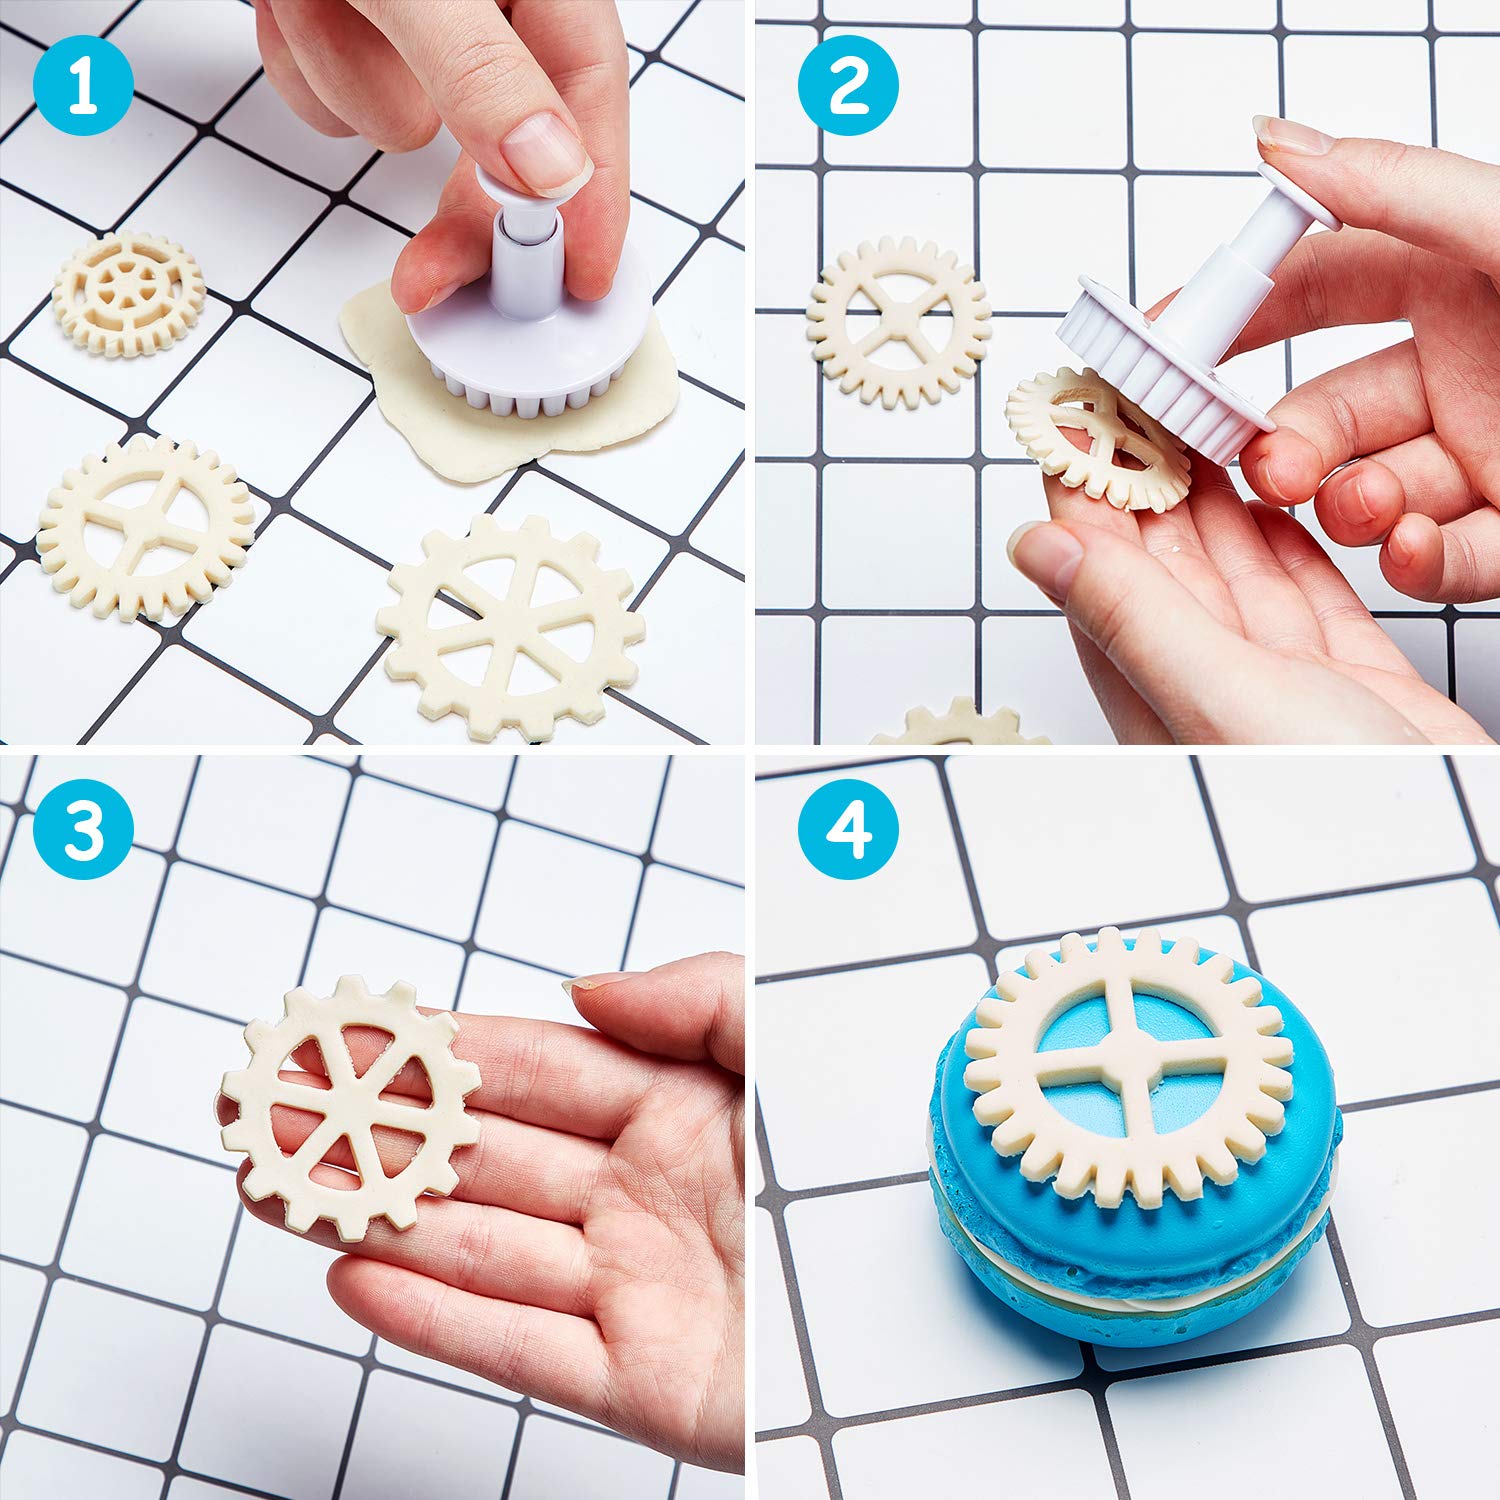 6 Pieces Gear Cookie Cutters Steampunk Fondant Molds Cogs Mold Clock Wheel Mold Fondant Cake Mold Plunger Cutter for Cupcake Decoration Gingerbread Cookie Polymer Clay Crafting Project